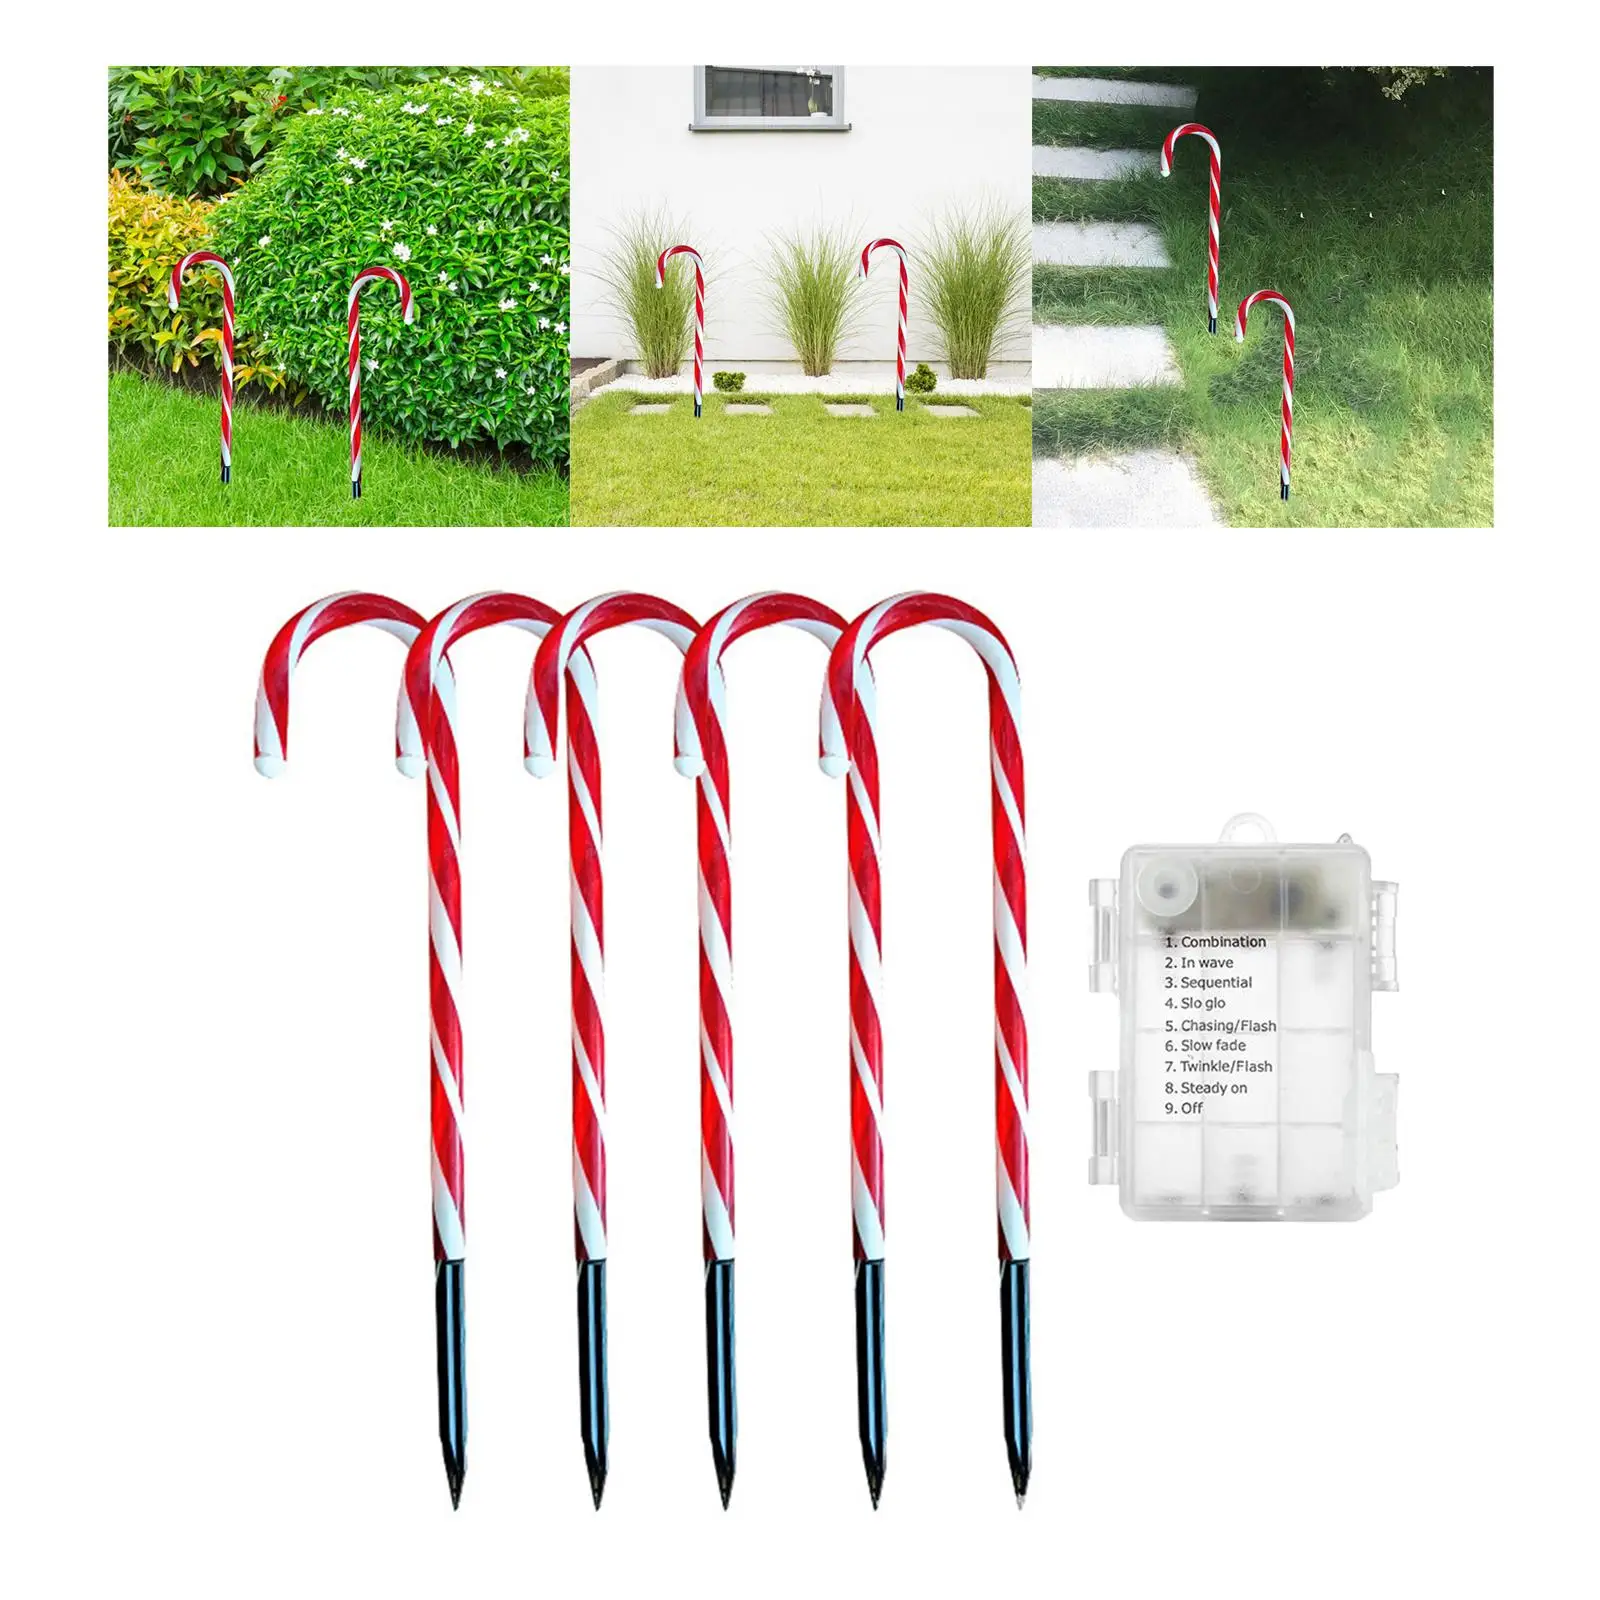 Christmas LED Lamps Pathway Marker Fairy Lights Crutch Light Candy Cane Battery Operated Lights for Outdoor Garden Walkway Patio